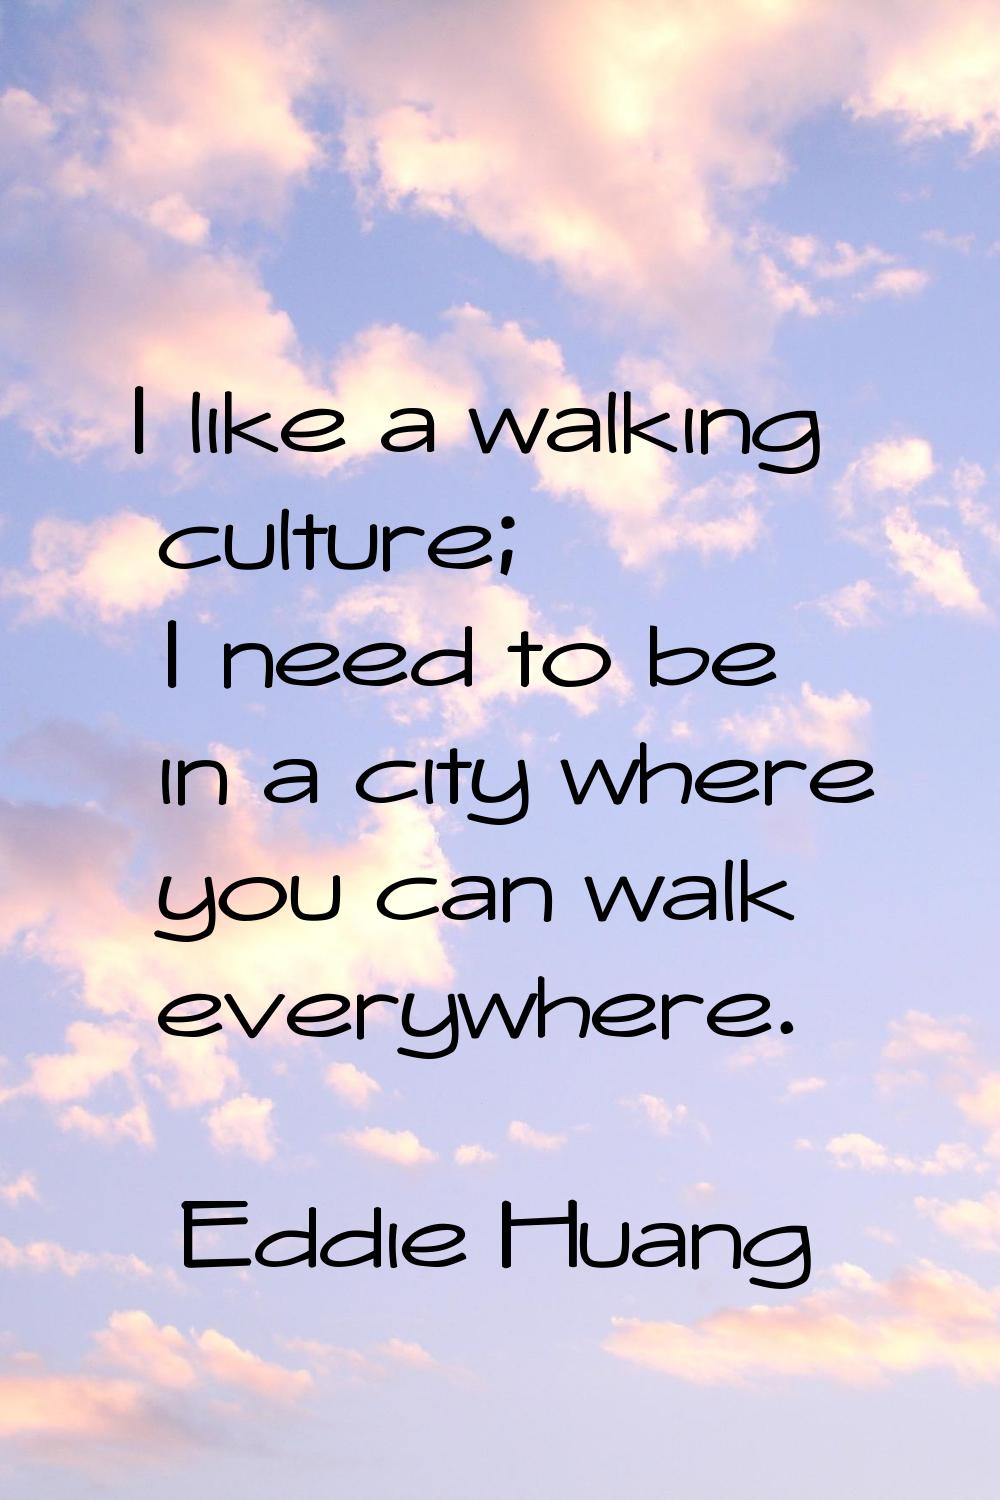 I like a walking culture; I need to be in a city where you can walk everywhere.